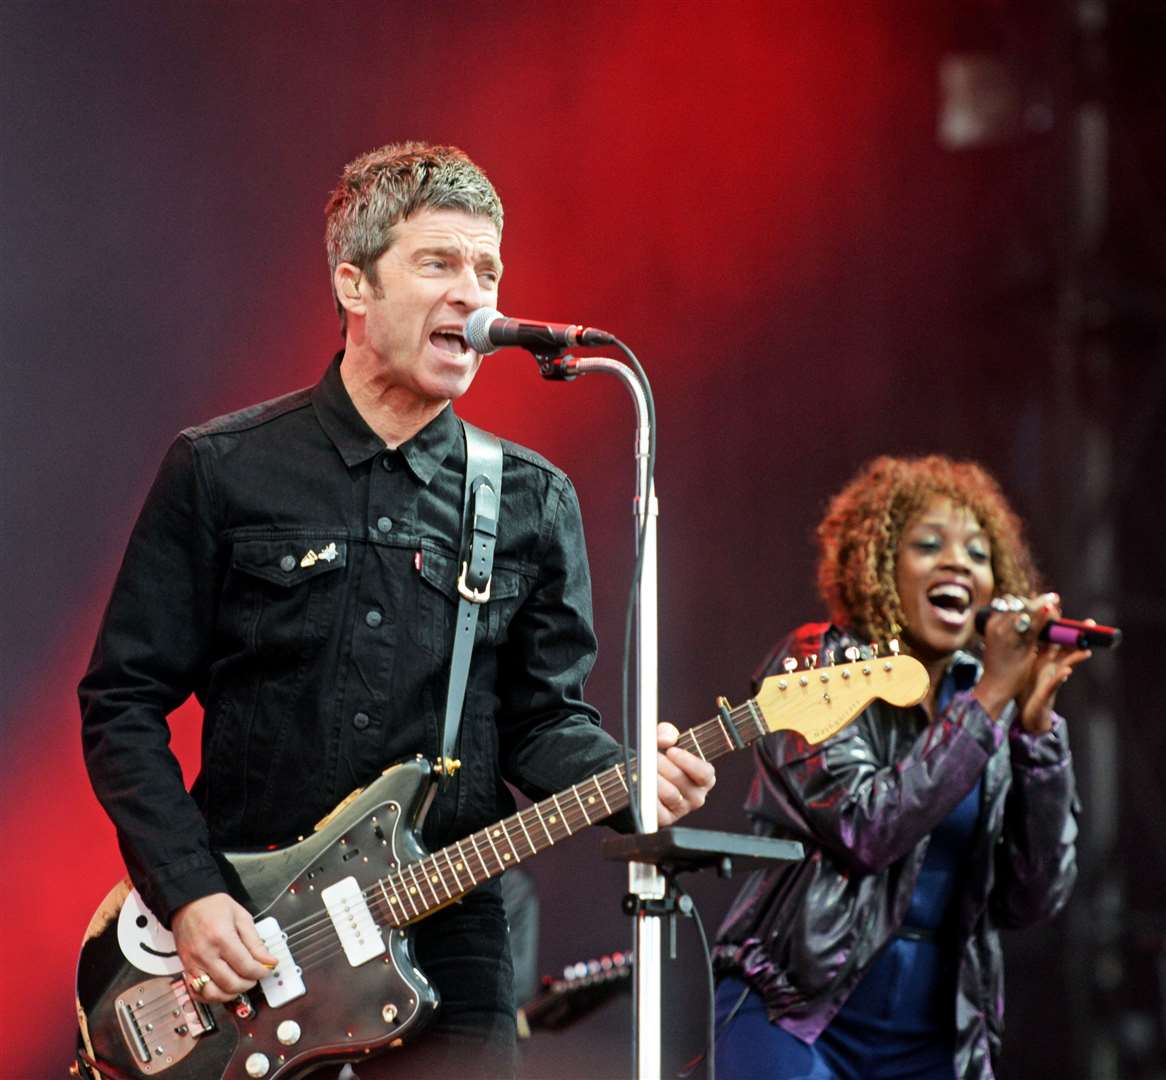 Noel Gallagher's High Flying Birds on stage at Bught Park in 2019. Picture: Gair Fraser